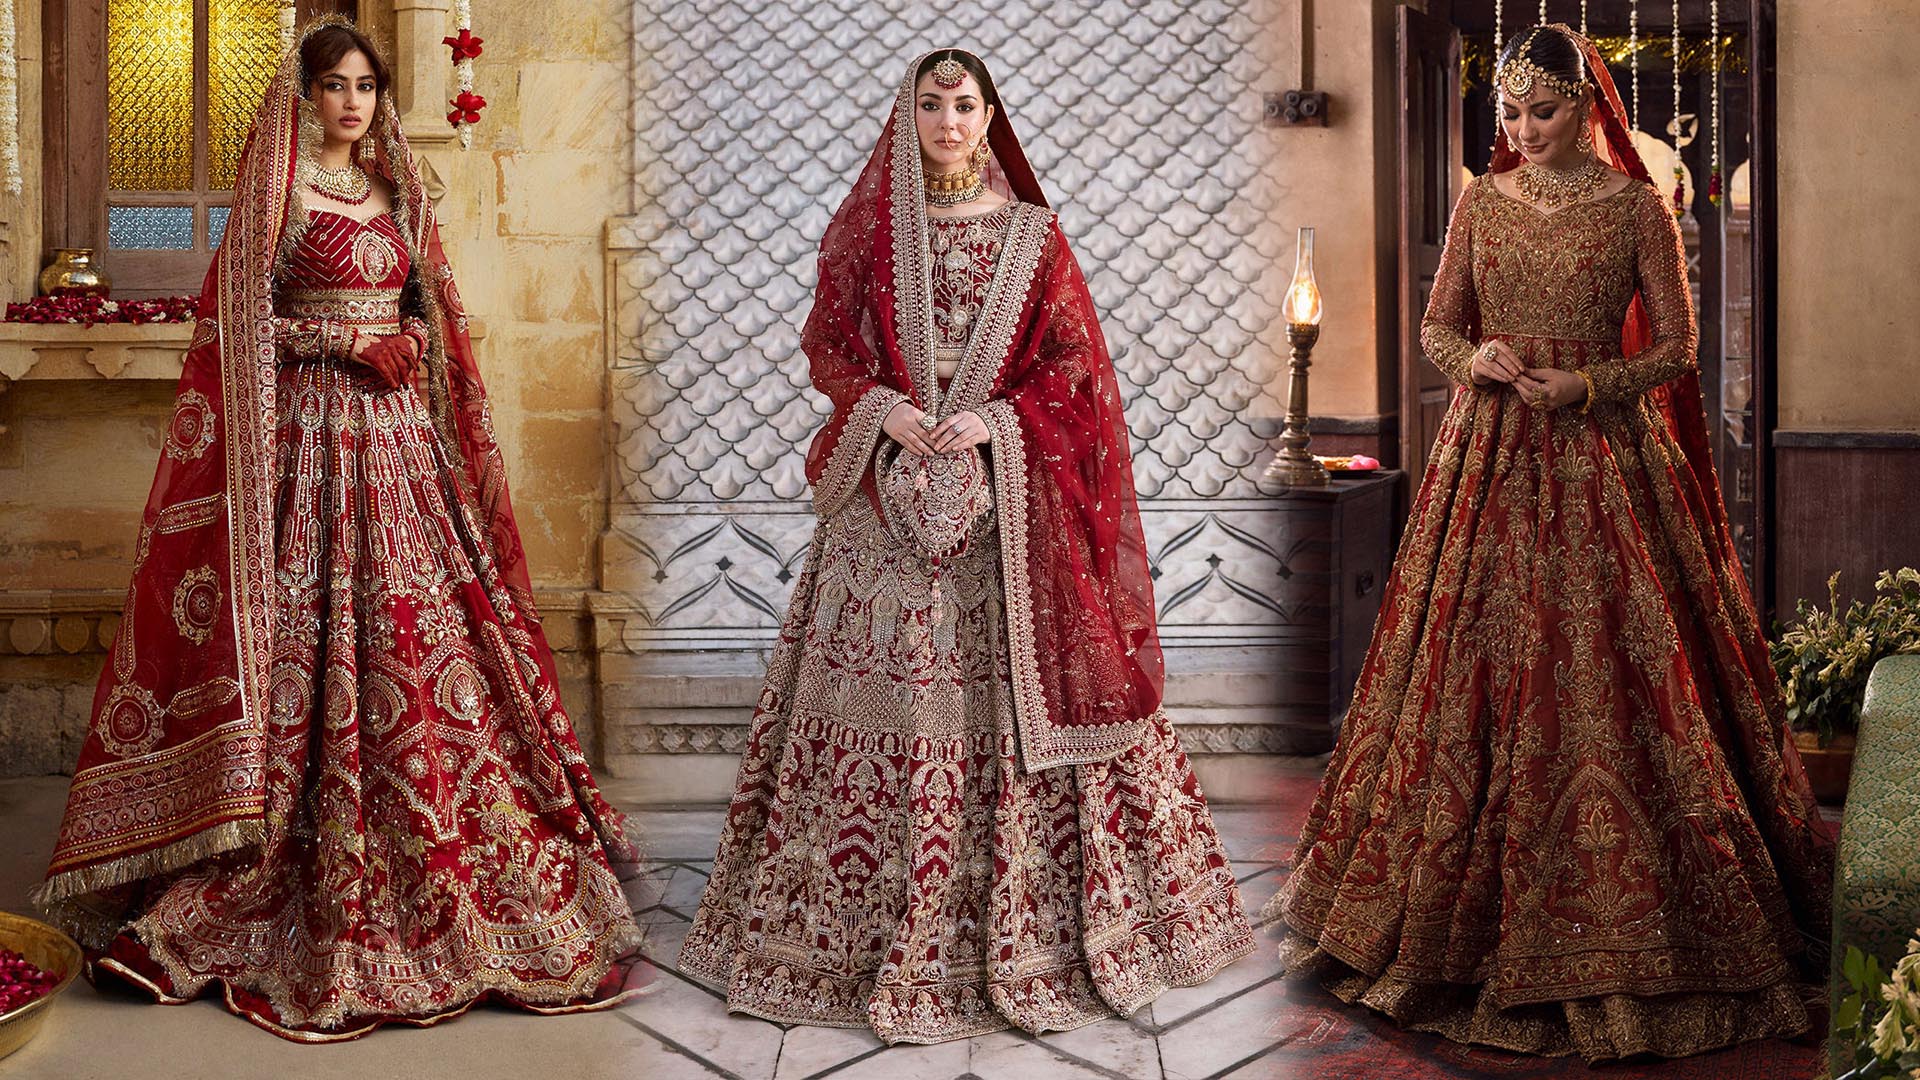 Bridal Dresses In Islamabad - Bridal Dresses In Islamabad With Prices -